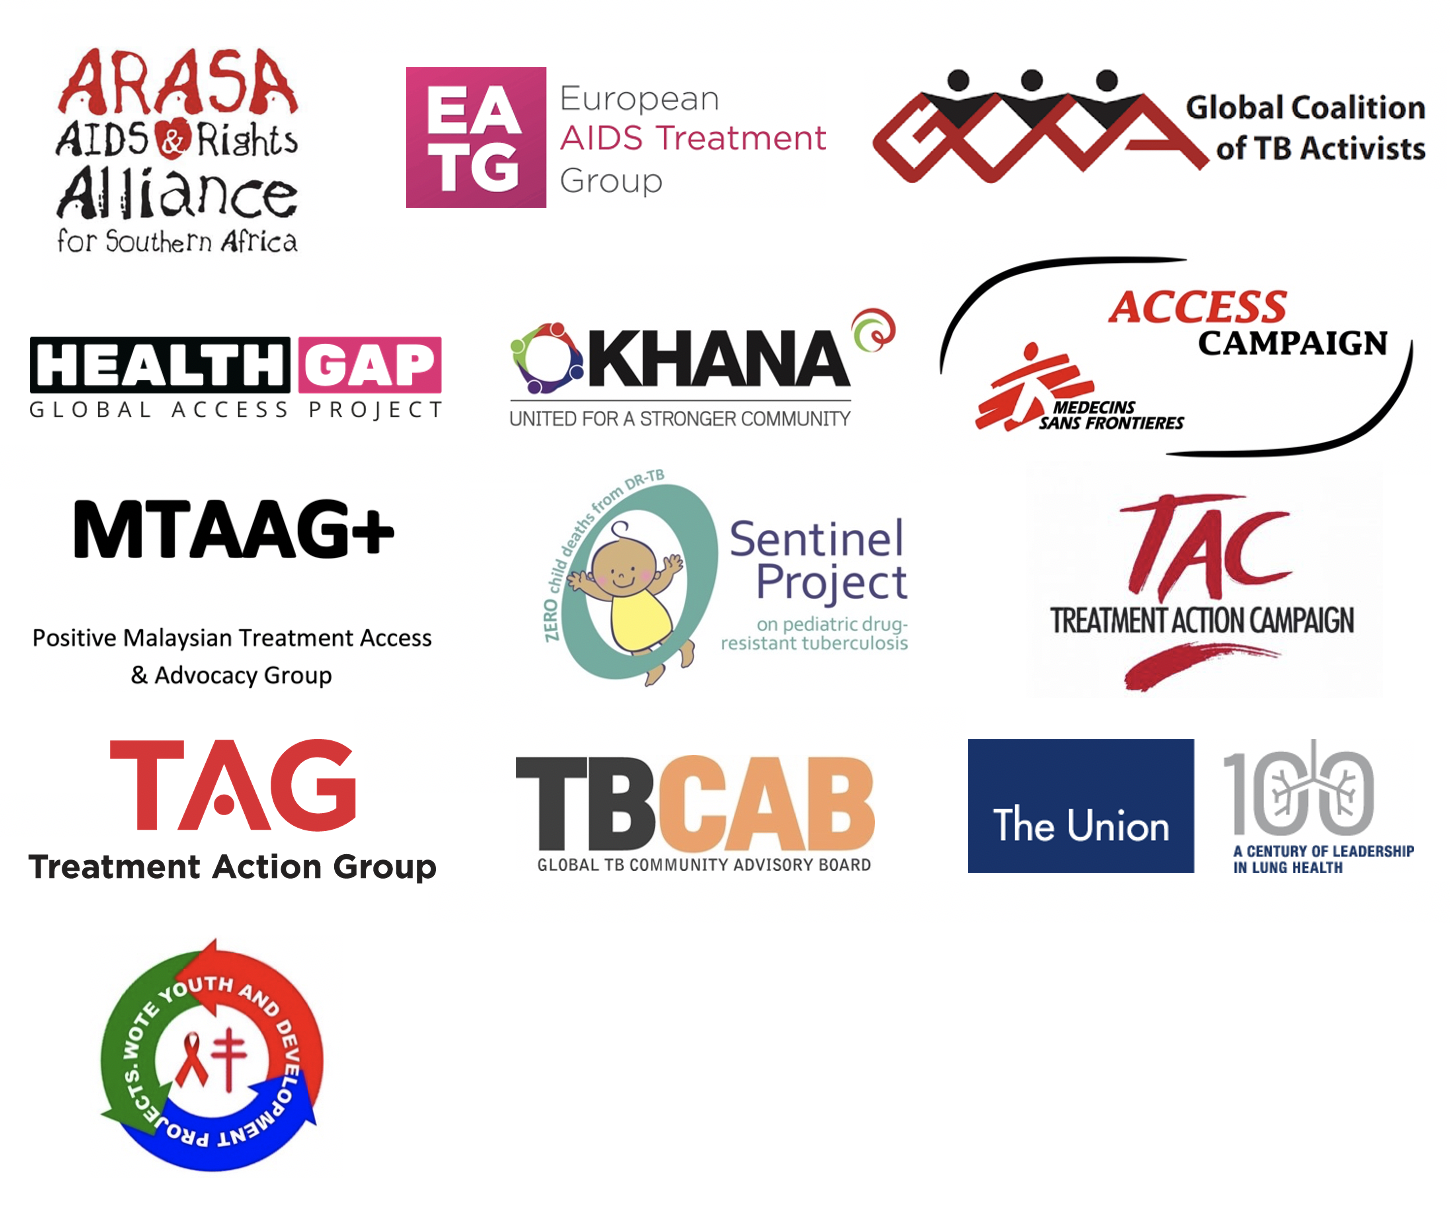 Logos of: ARASA, EATG, GCTB, Health Gap, Okhana, MSF Access Campaign, MTAAG+, Sentinenel Project, Treatment Action Campaign, TAG, TB CAB, The Union, Wote Youth and Development Projects